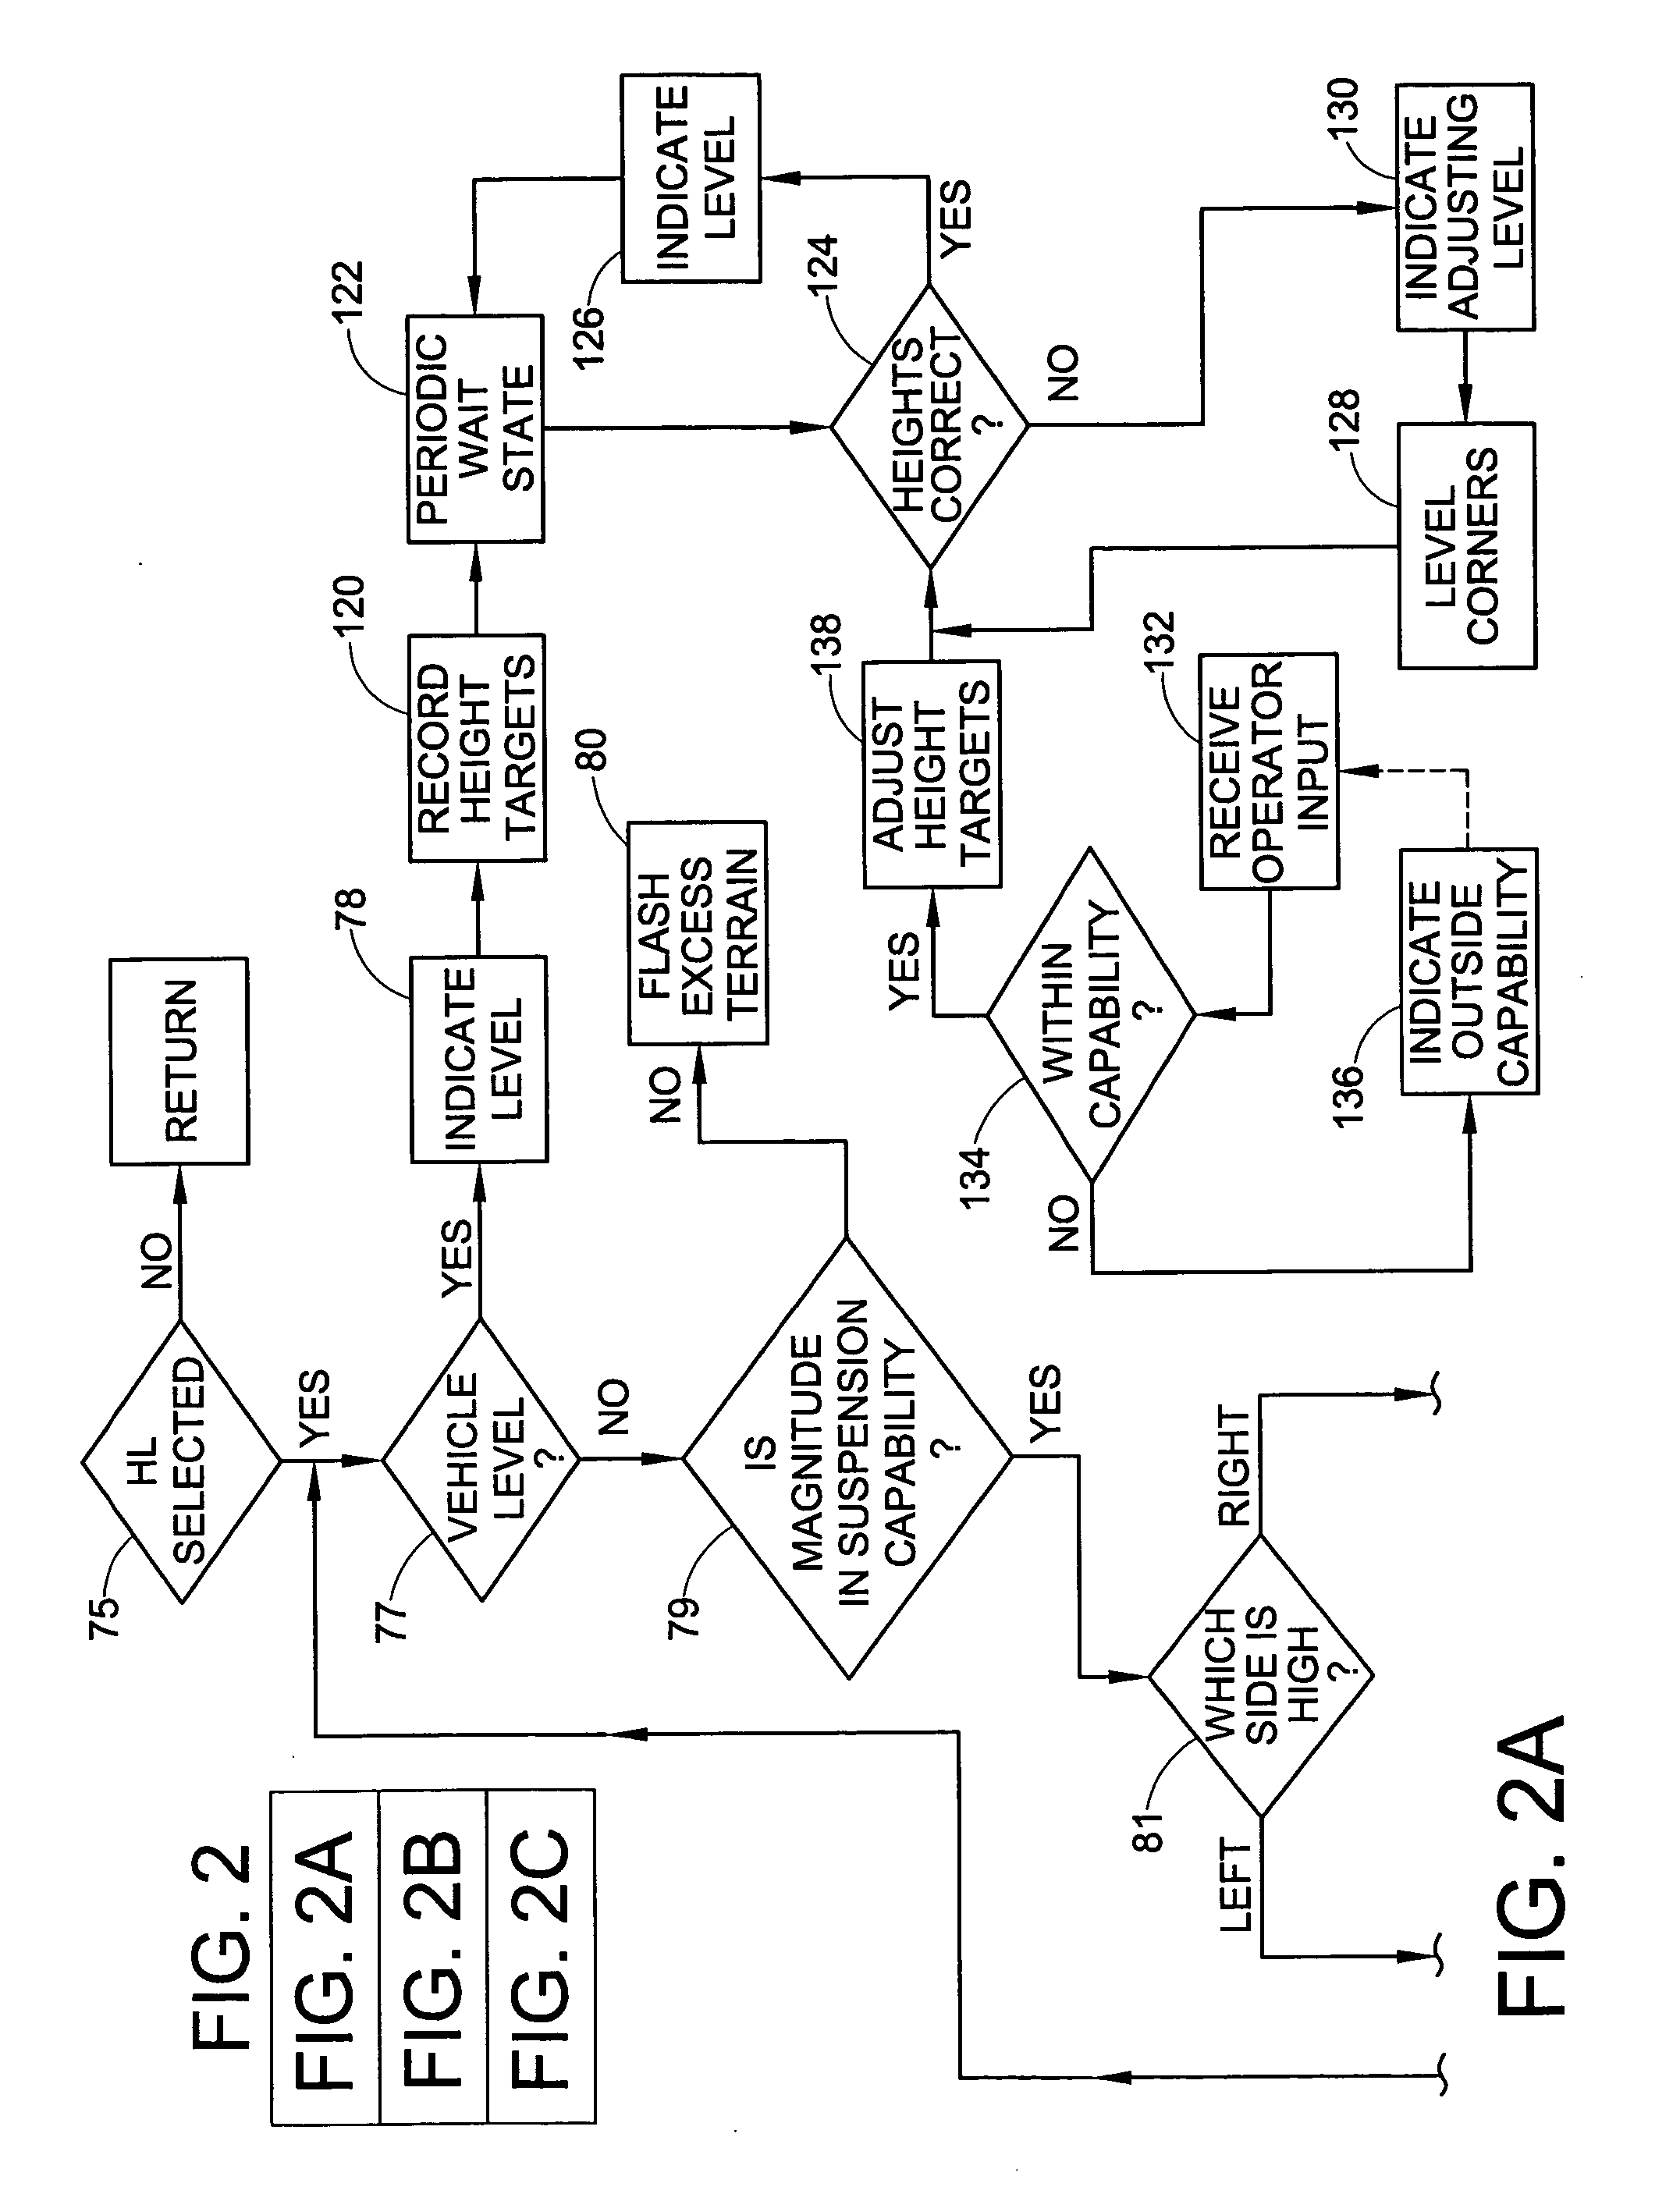 Method and system for adjusting a vehicle aligned with an artificial horizon